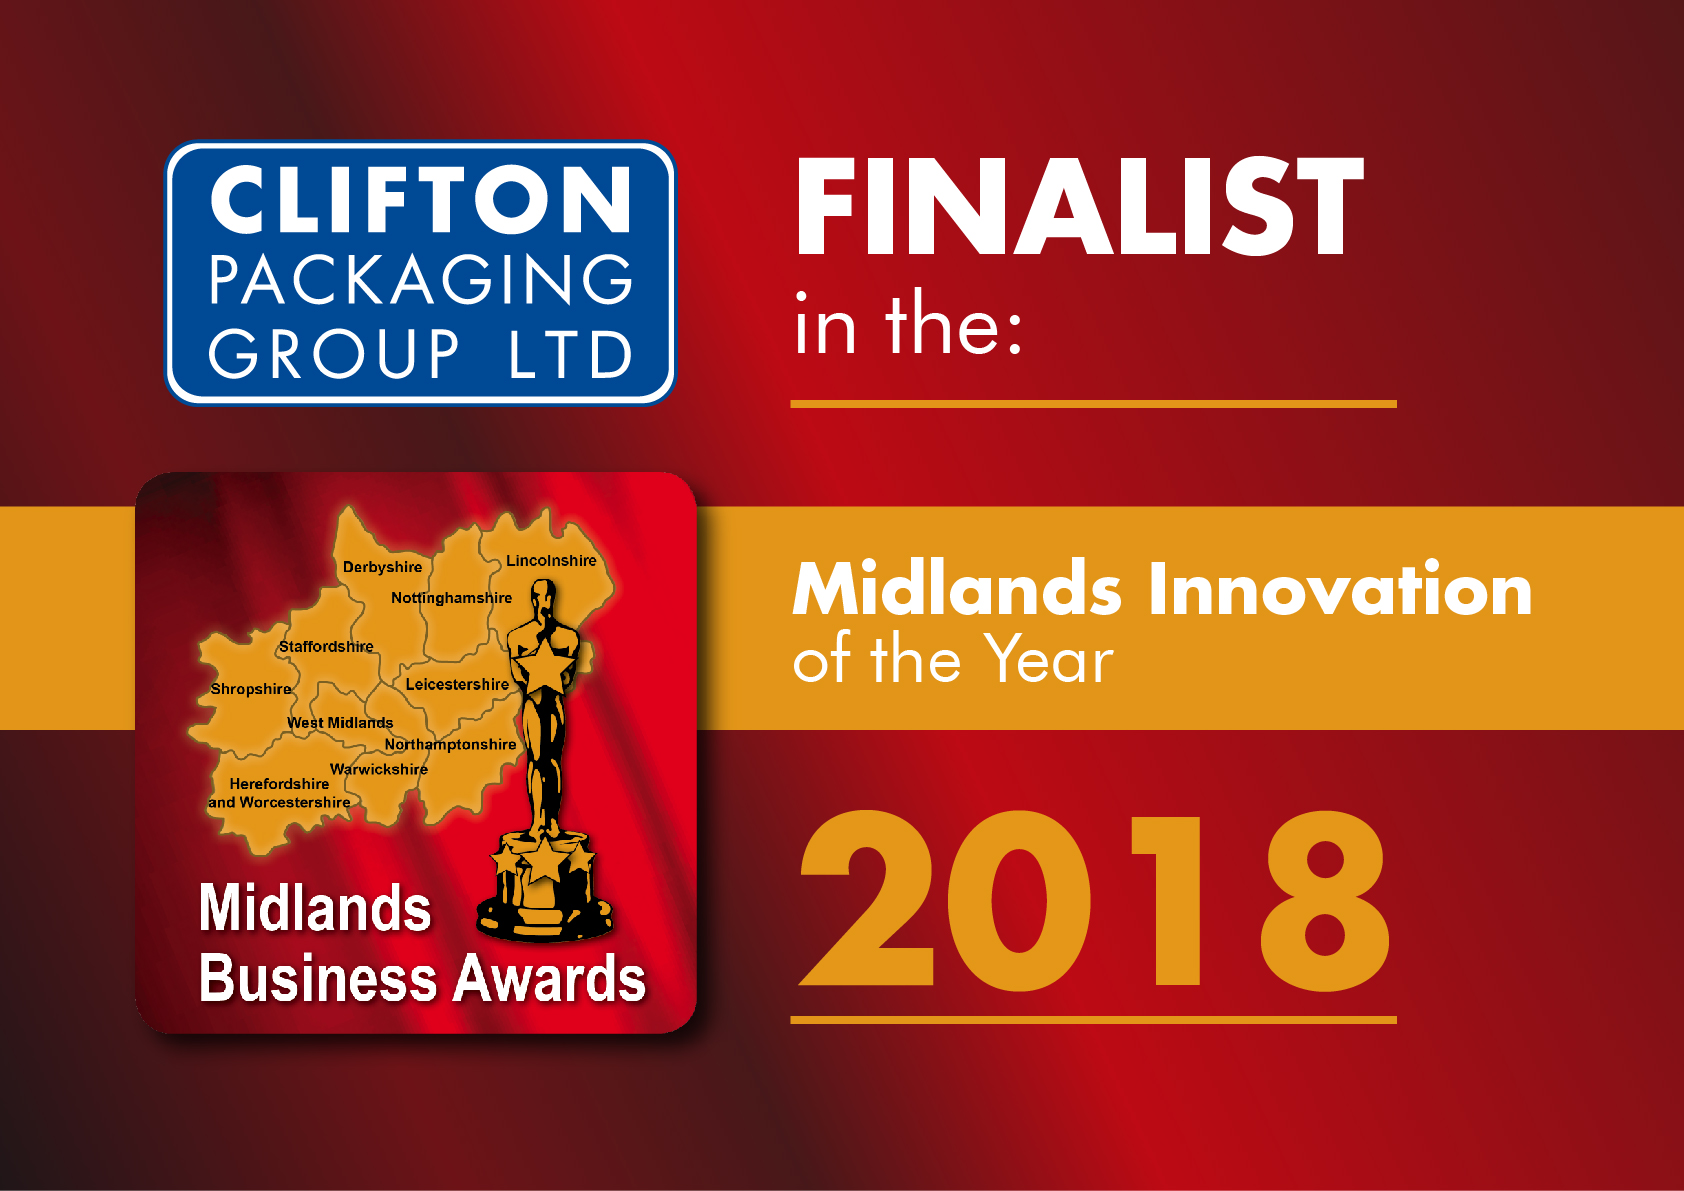 Clifton Packaging Group - Finalist in the Midlands Innovation of the Year 2018